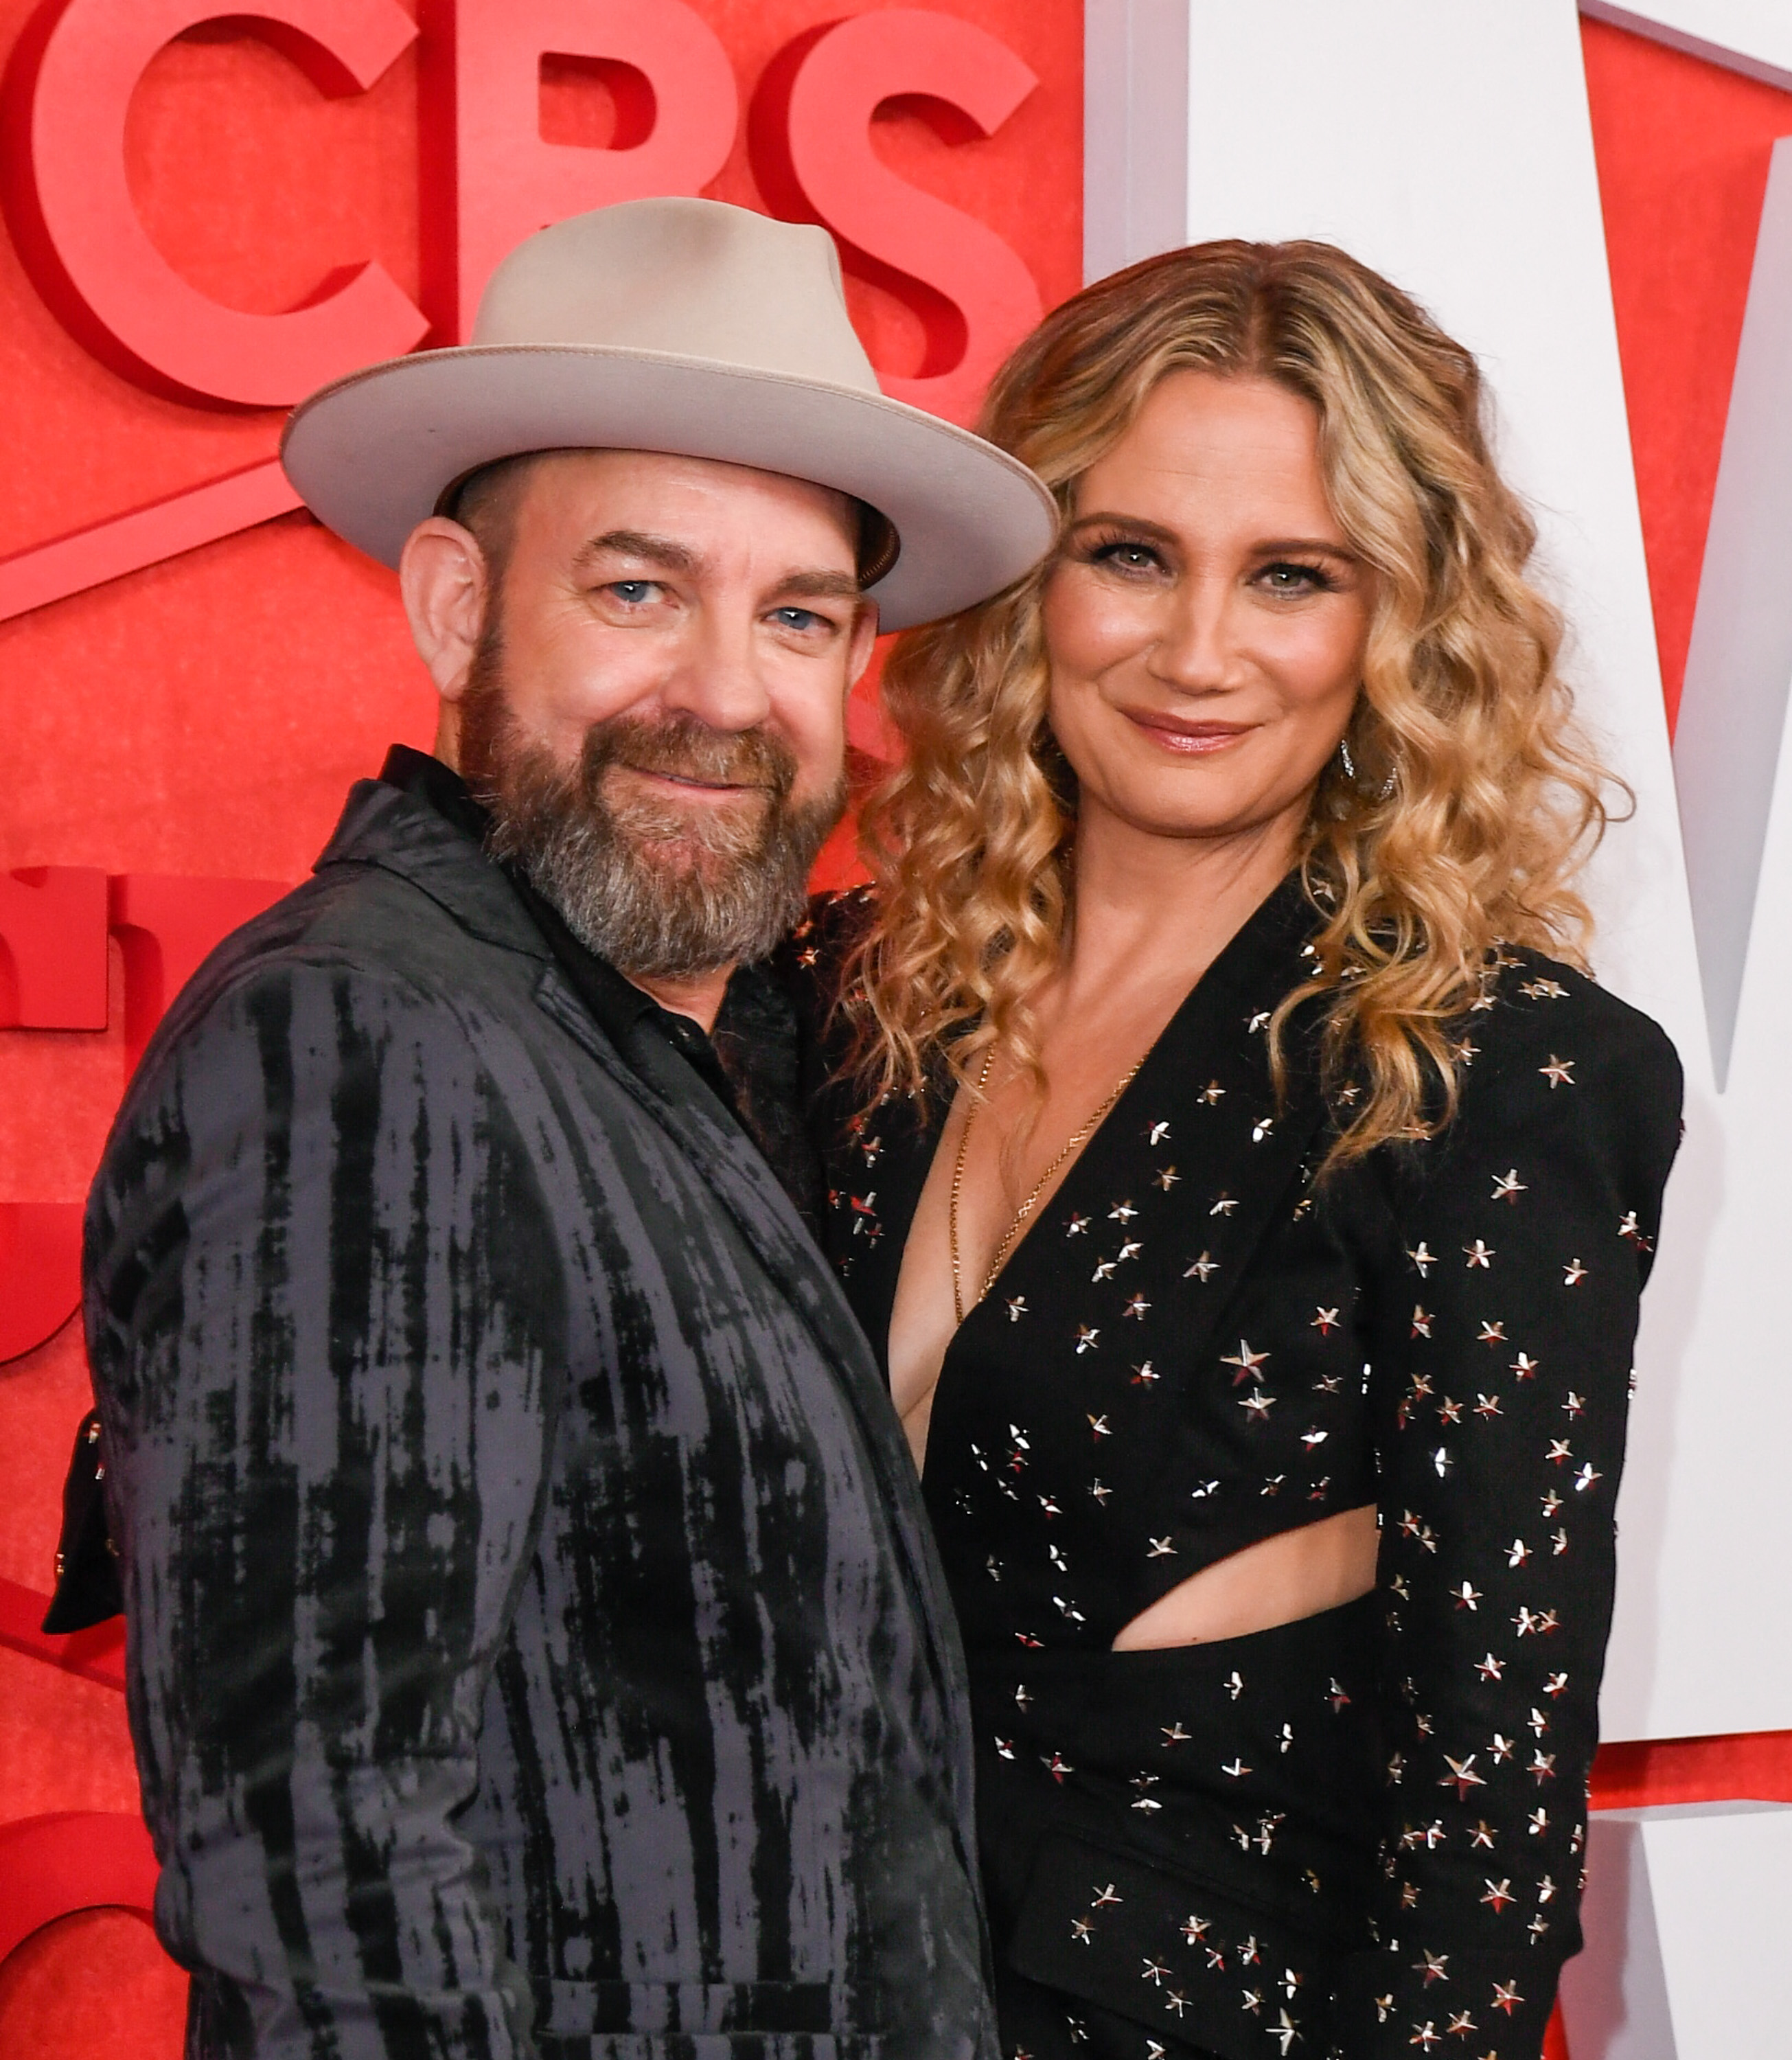 Sugarland returned after a hiatus in 2017